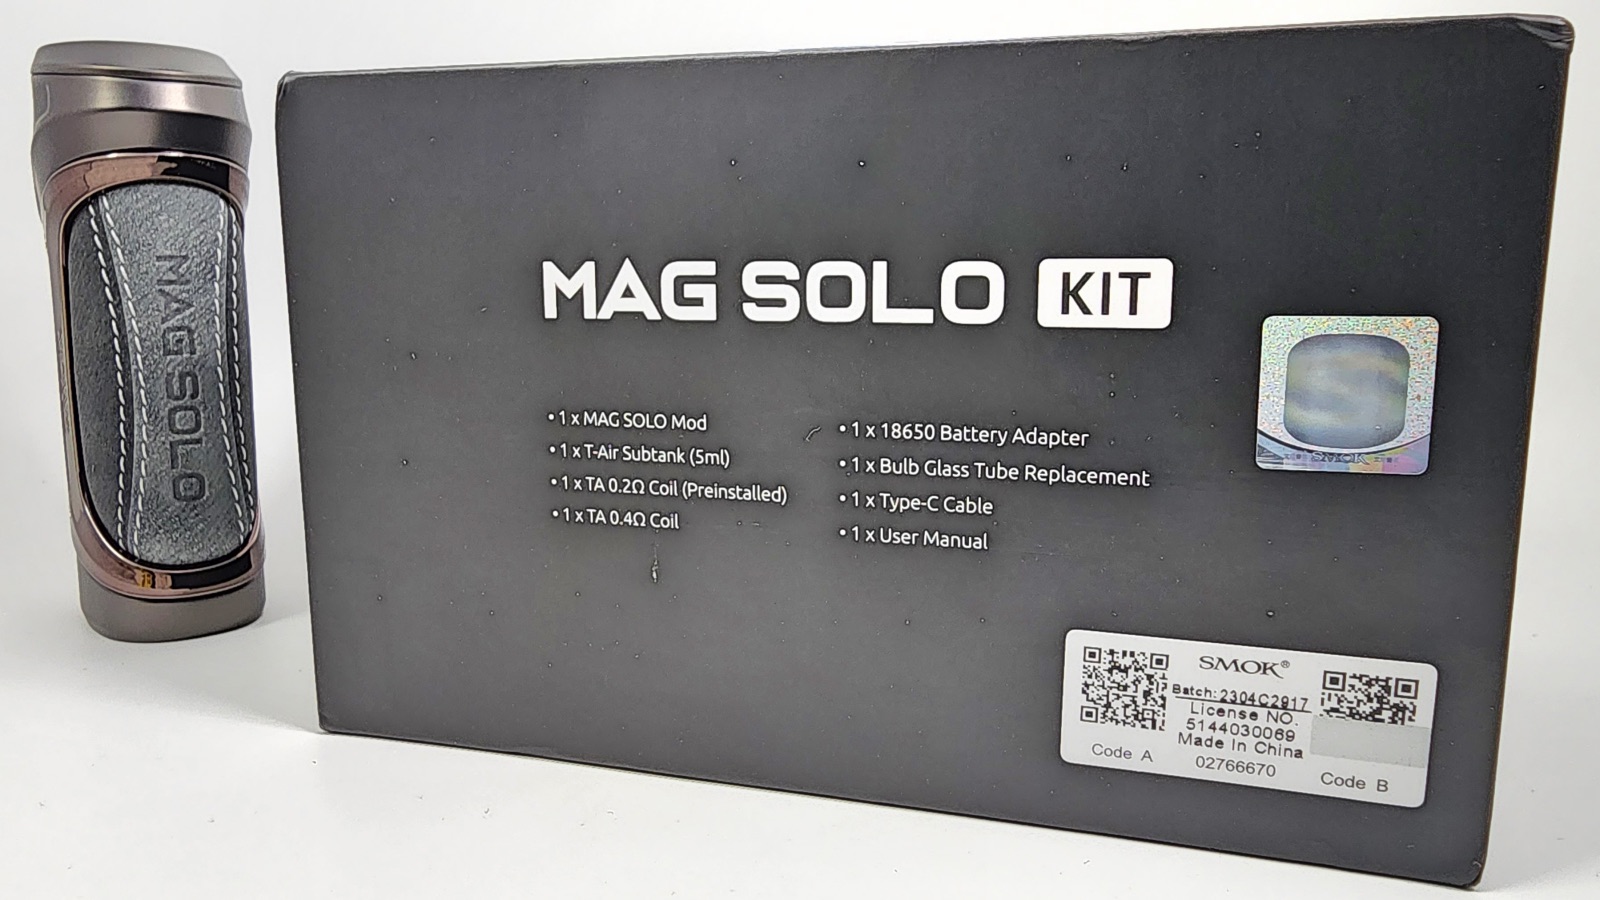 Smok Mag Solo Kit box with its contents